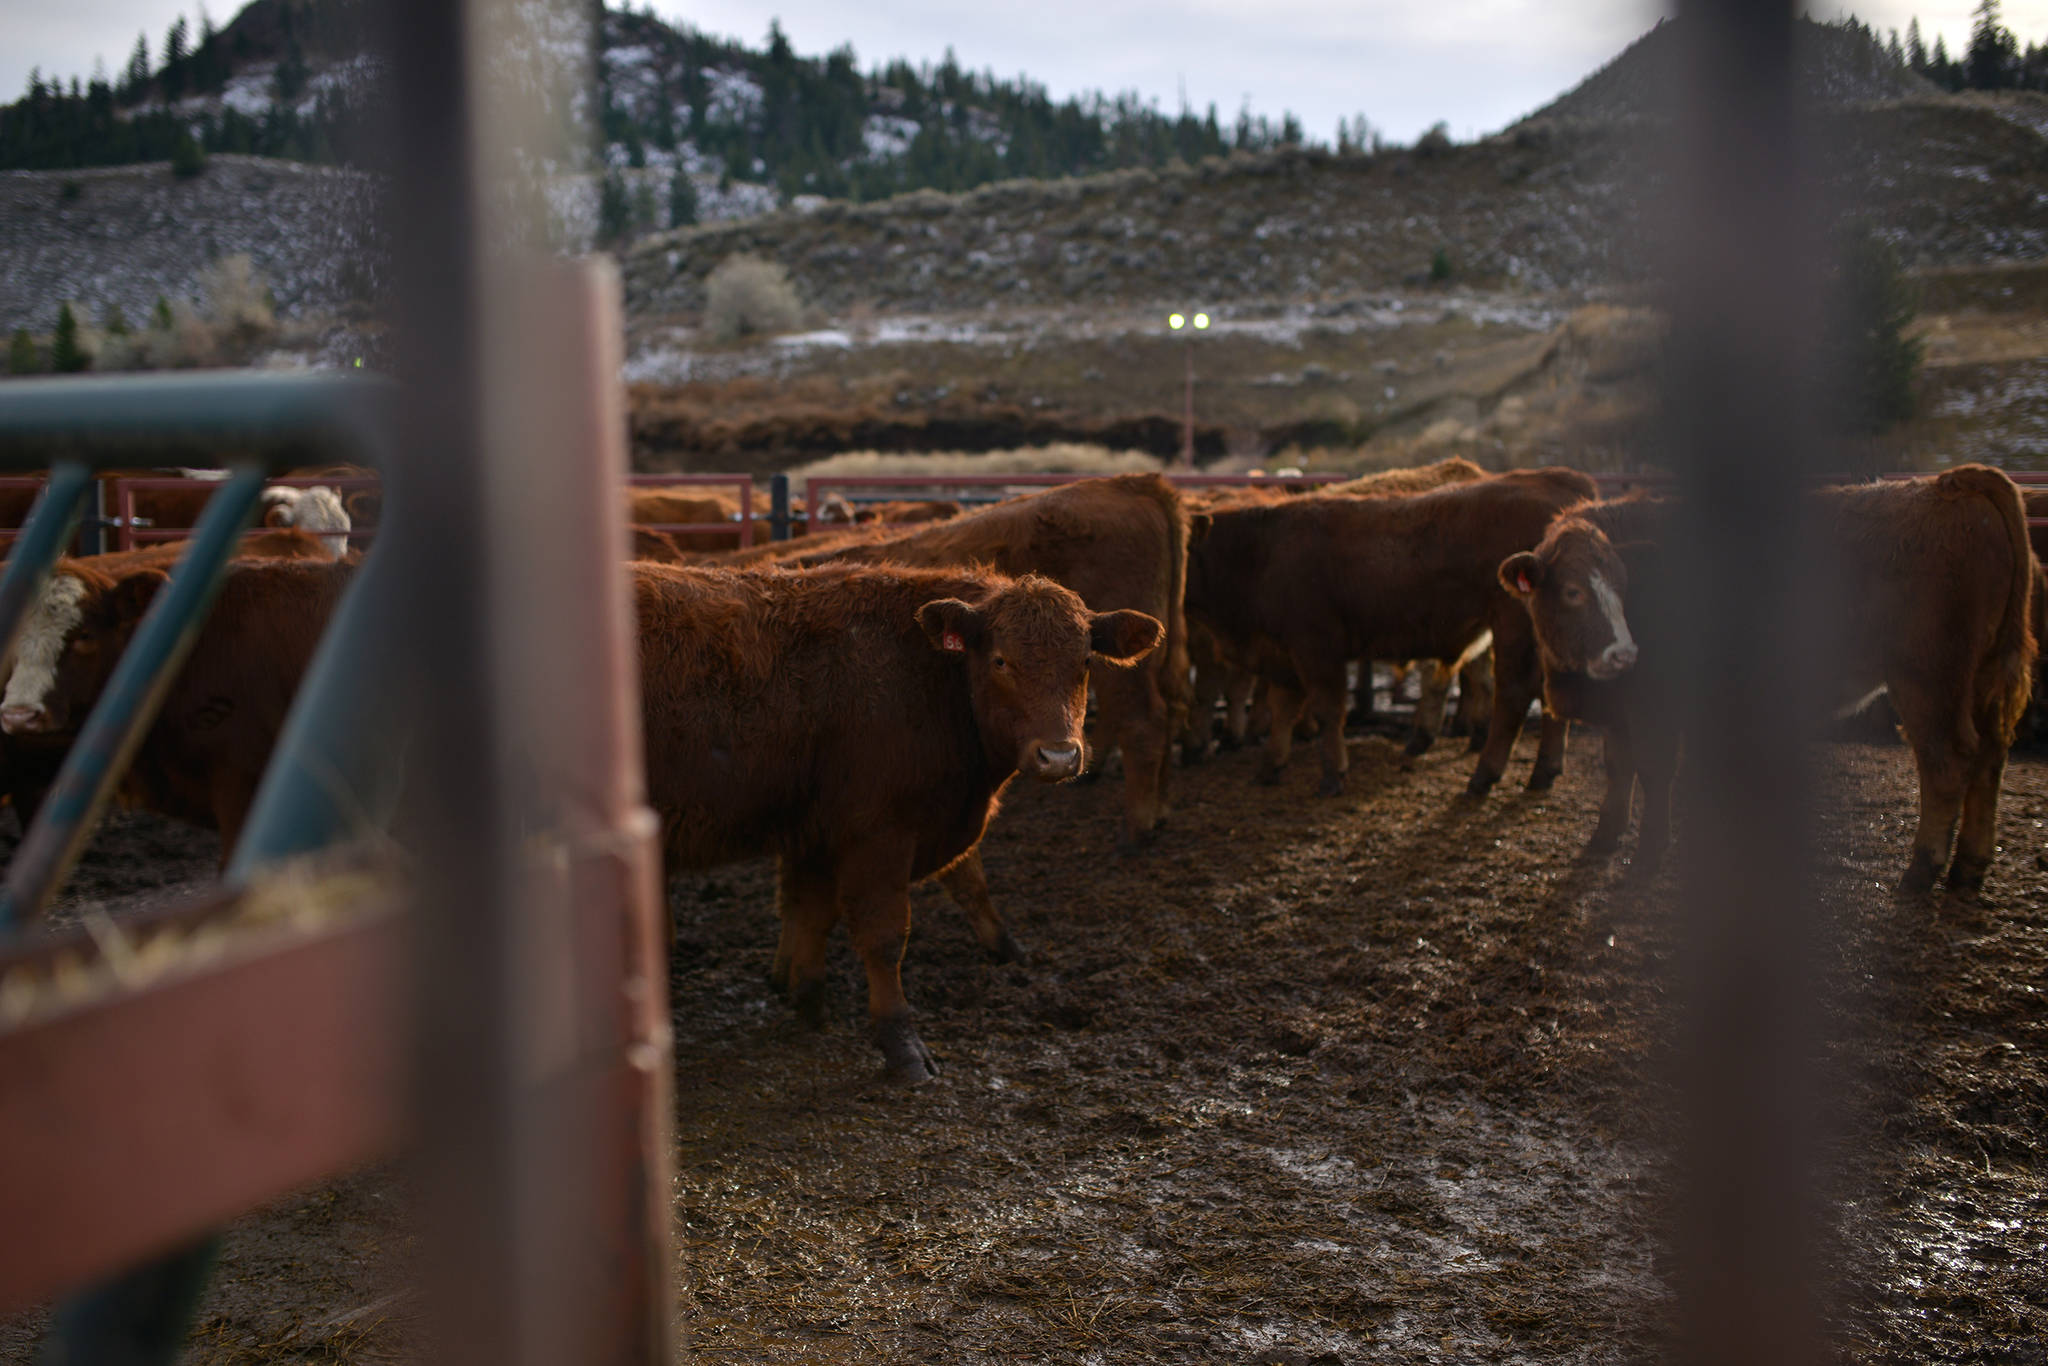 Cattle ready to be auctioned wait to be ushered in, at the BC Livestock Producers Co. in Kamloops, Nov. 16. (Phil McLachlan - Black Press Media)